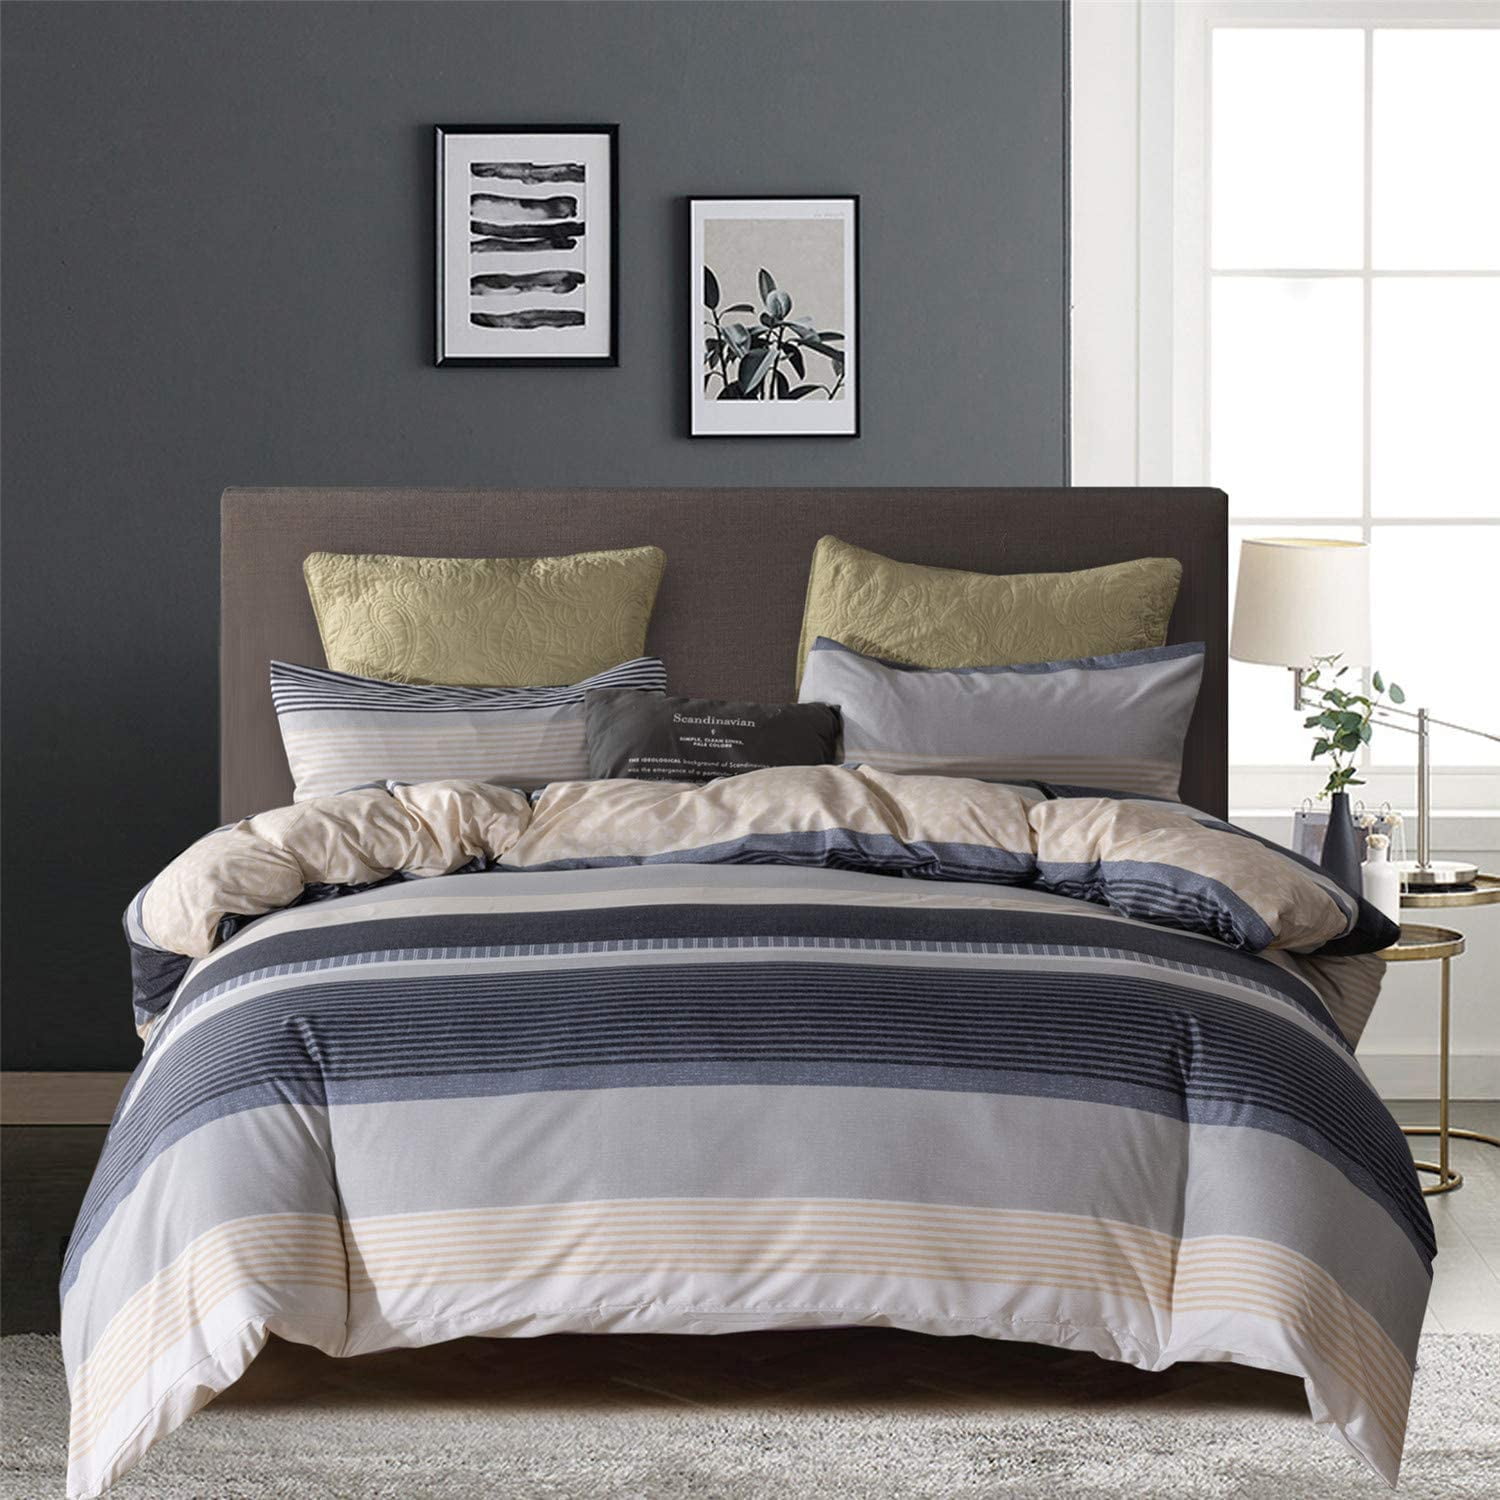 Details about   Gray Grey White Black Plaid Grid Geo 5 pc Comforter Set Full Queen King Bedding 